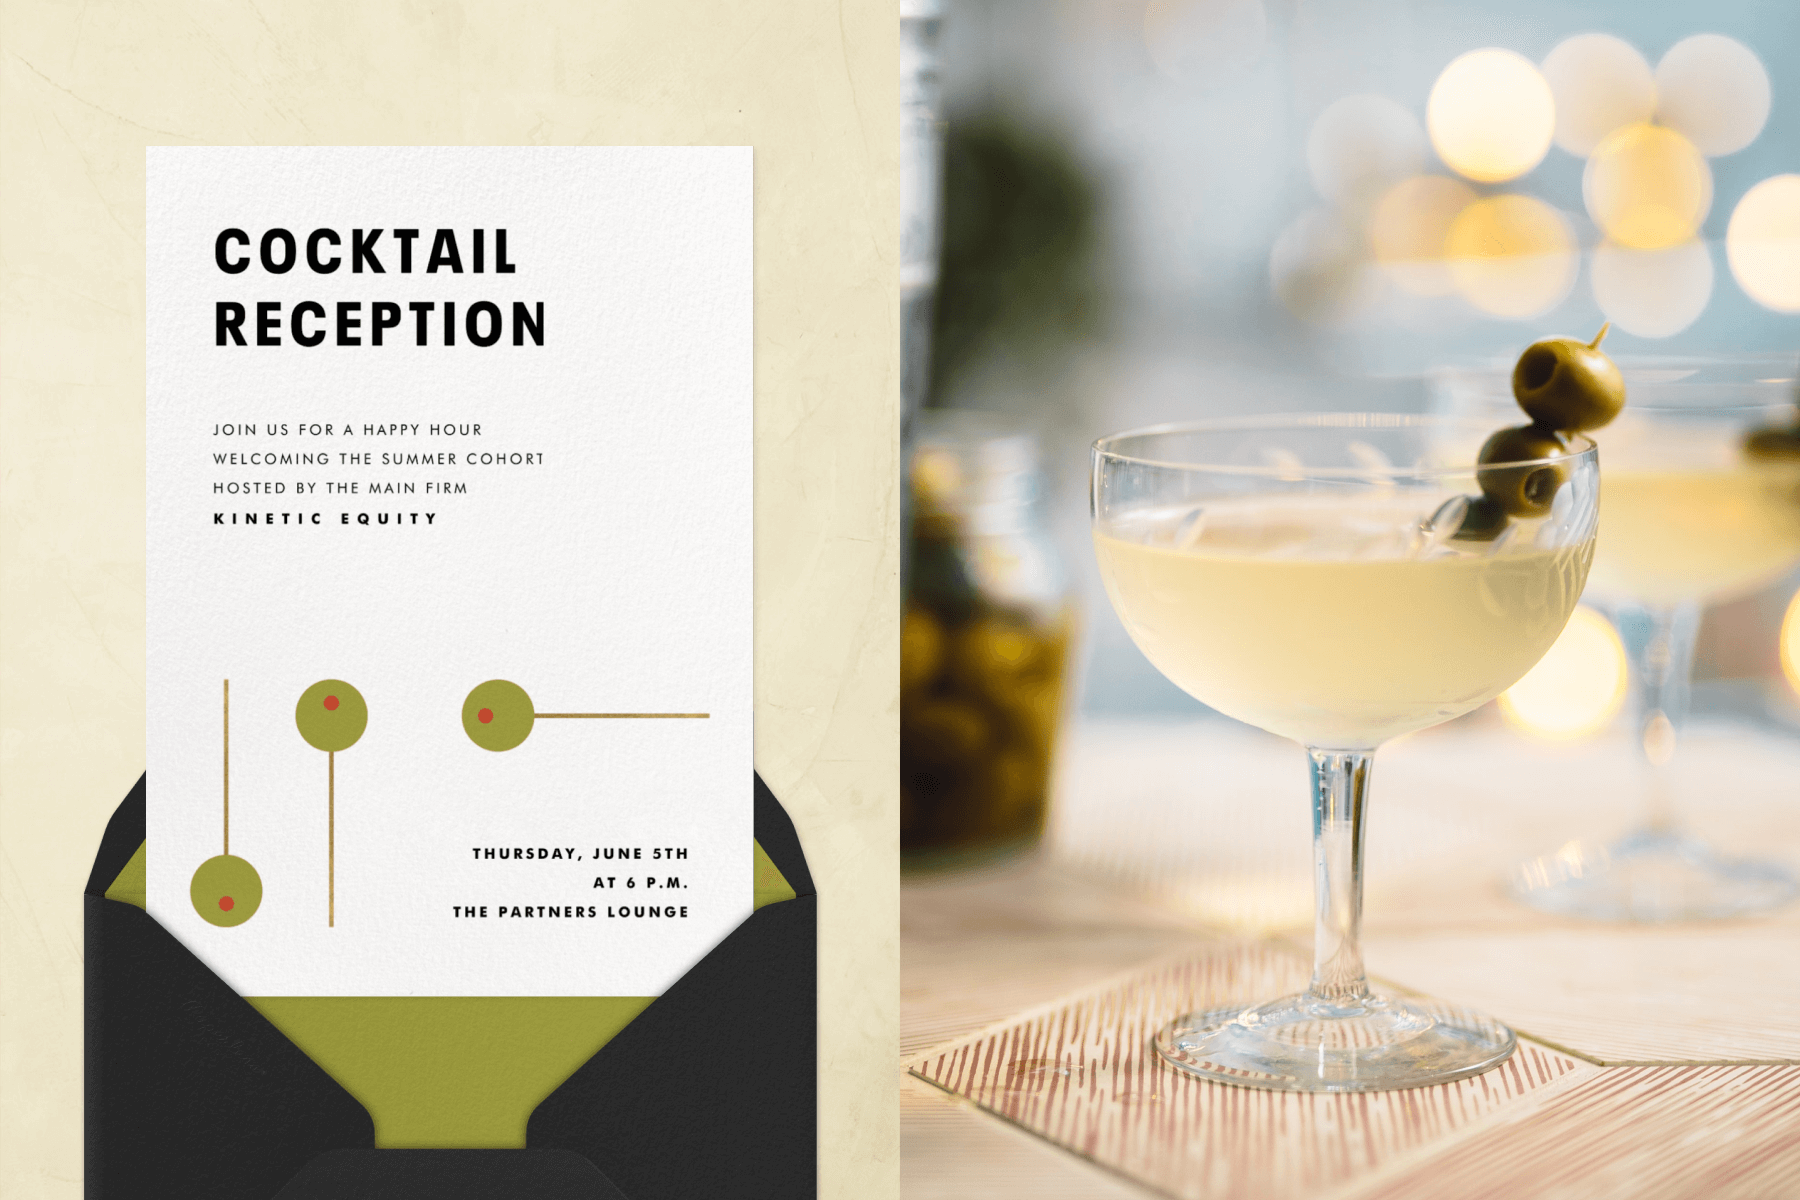 Left: A cocktail reception invitation with simple illustrations of three green olives on toothpicks. Right: A coupe glass holding a dirty martini with an olive garnish.